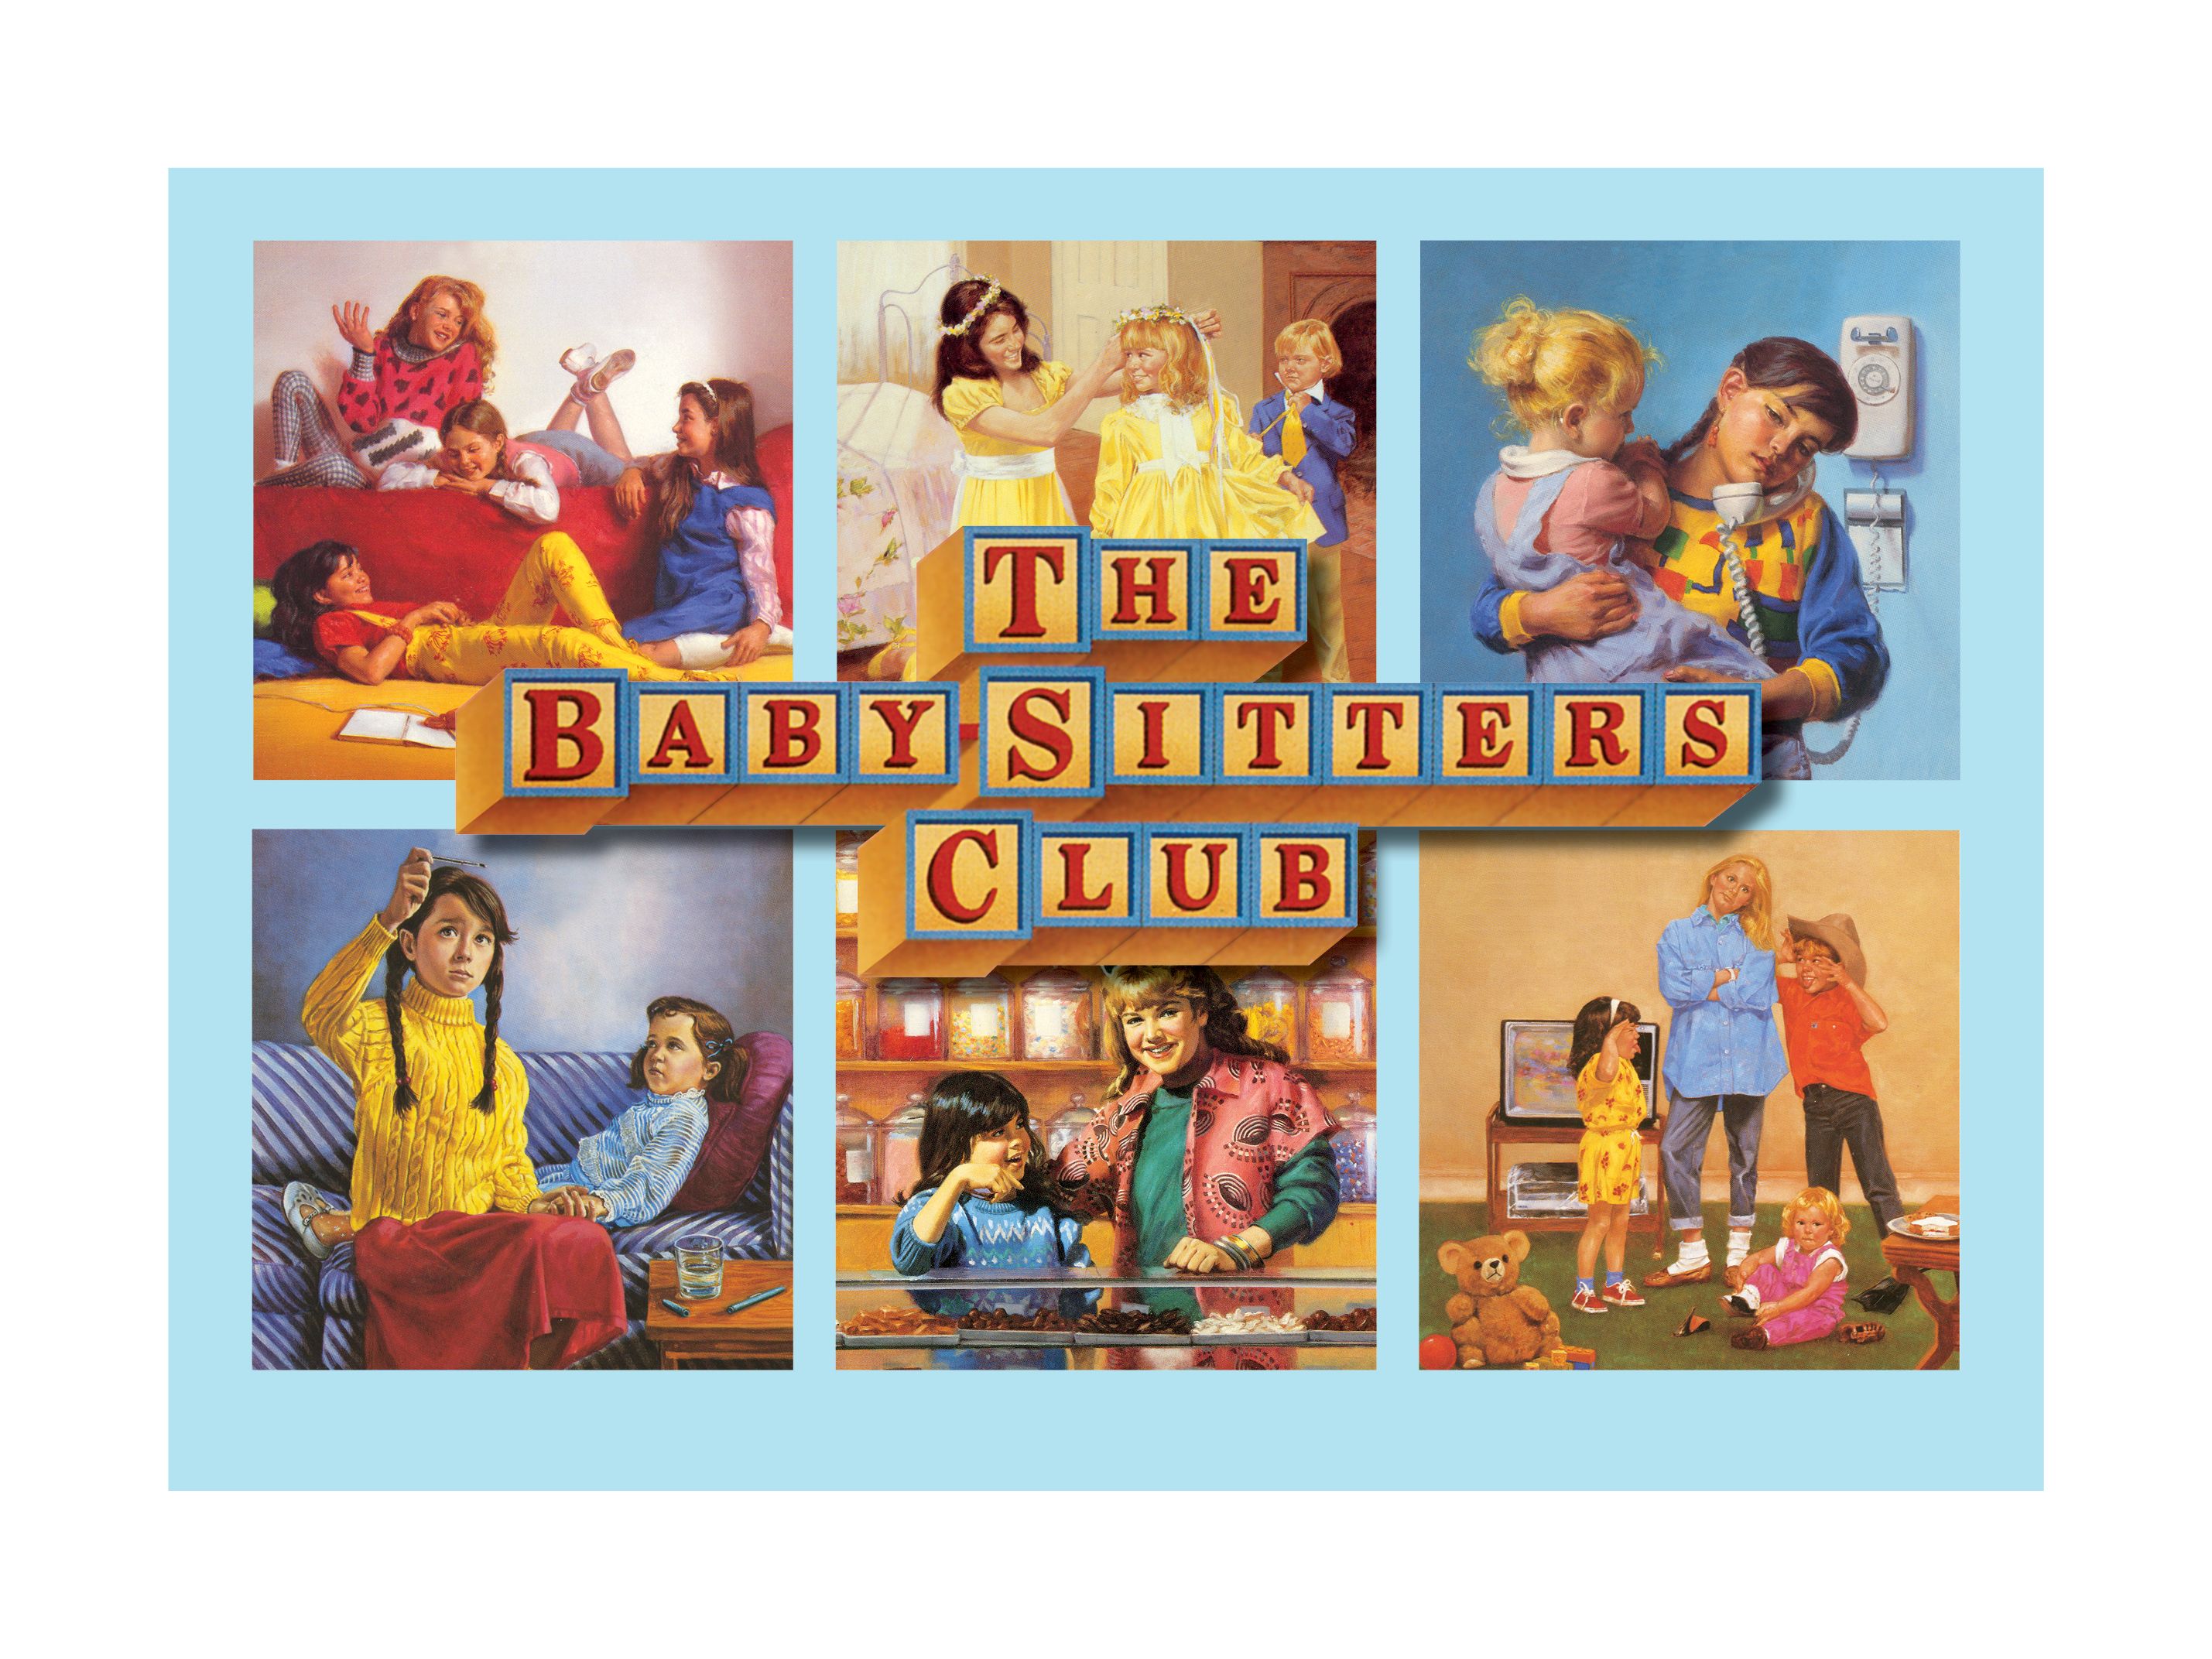 Netflix Brings Back 'The Baby Sitters Club' For Ten Episode Order